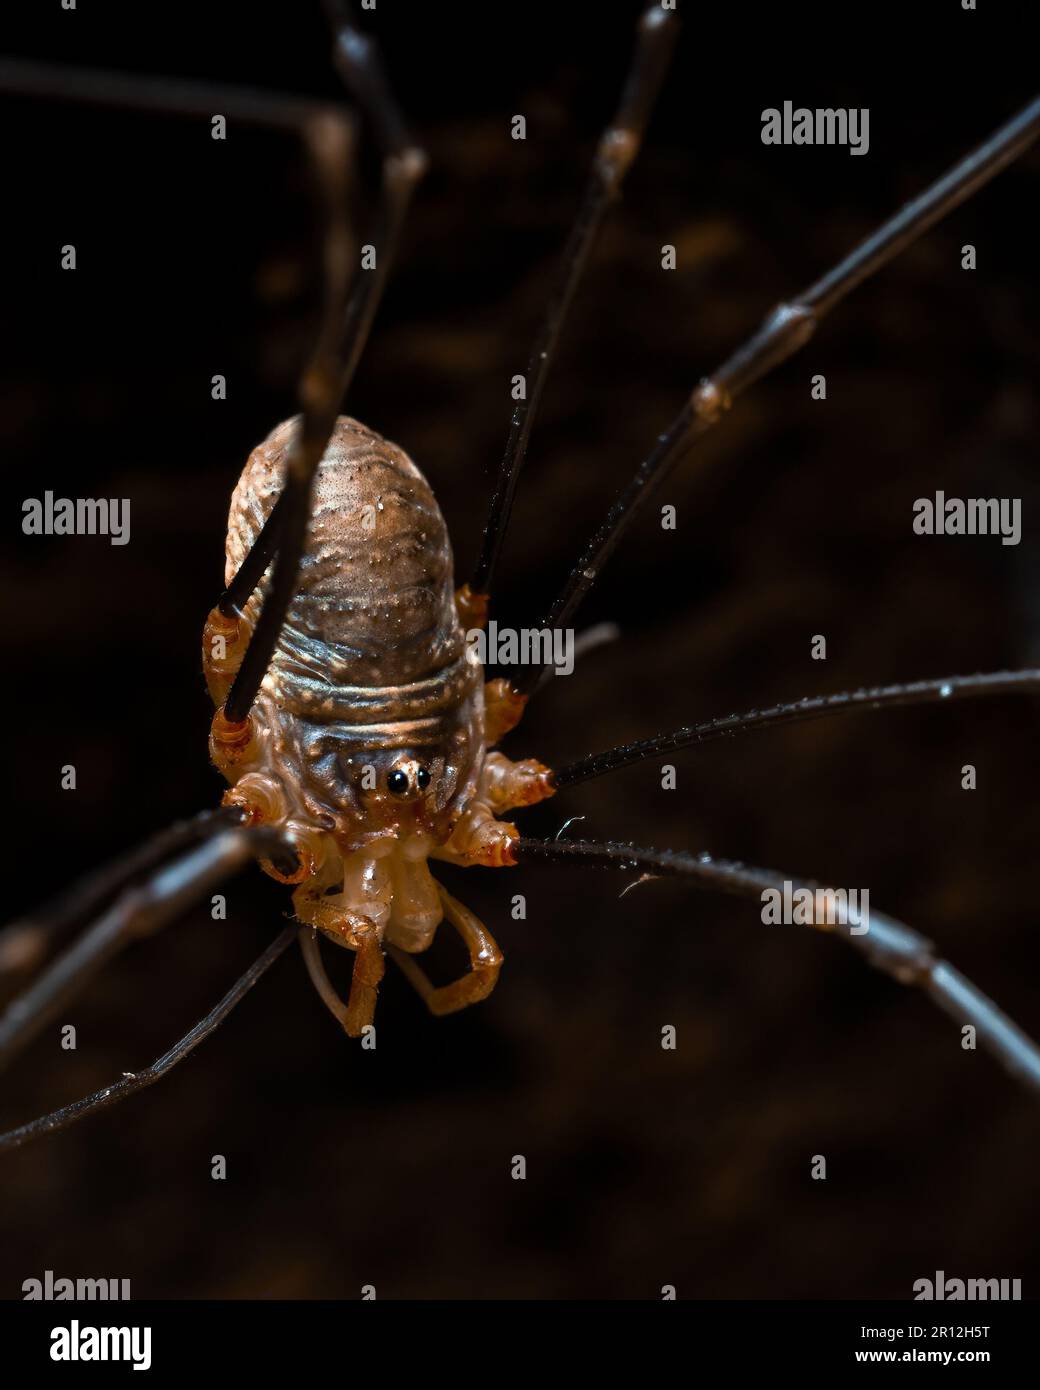 A macro shot of a tiny spider with its long limbs extended, perched on a dark background Stock Photo